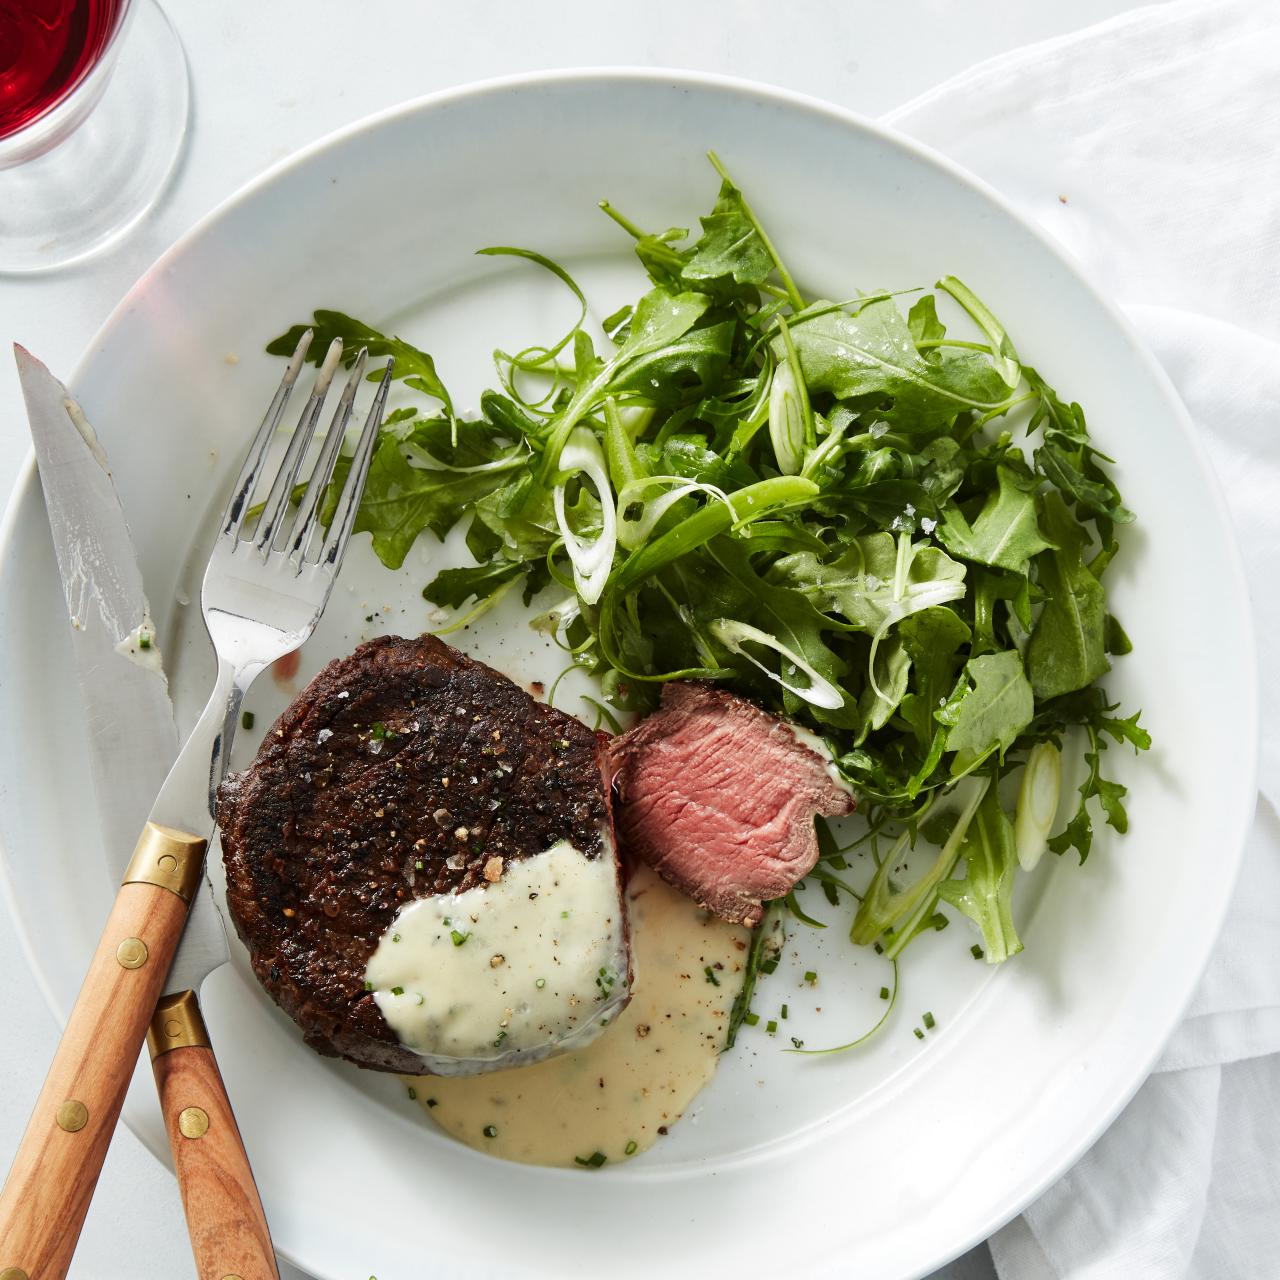 Cast Iron Steaks with Blue Cheese-Chive Butter